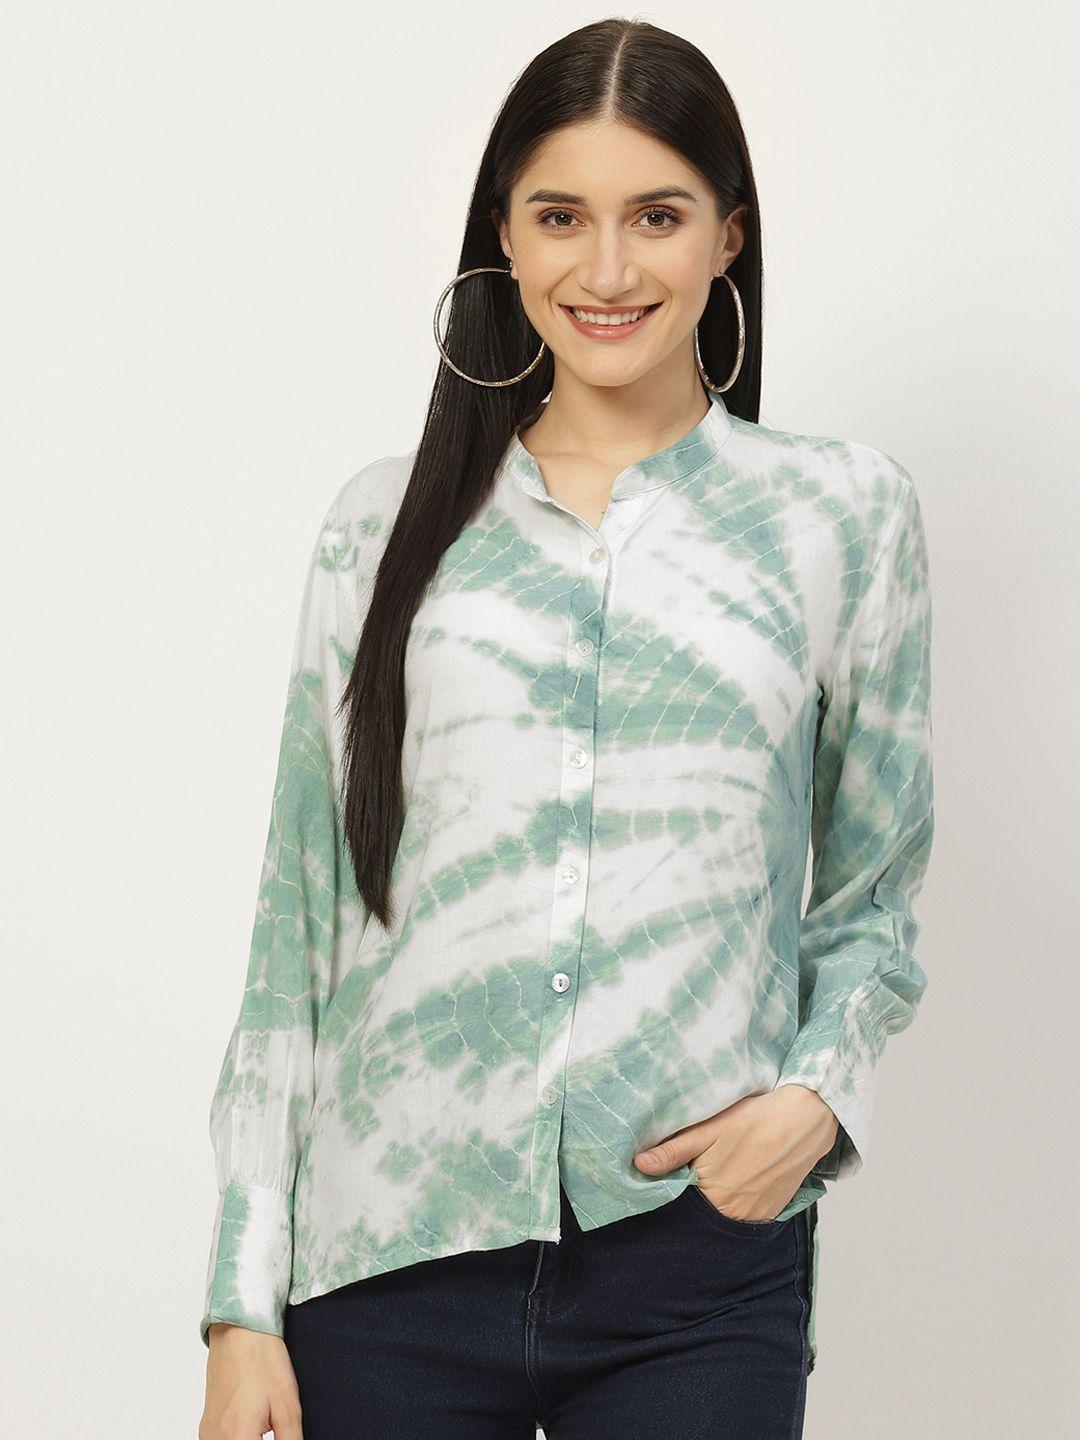 maaesa-green-&-off-white-tie-and-dye-shirt-style-top